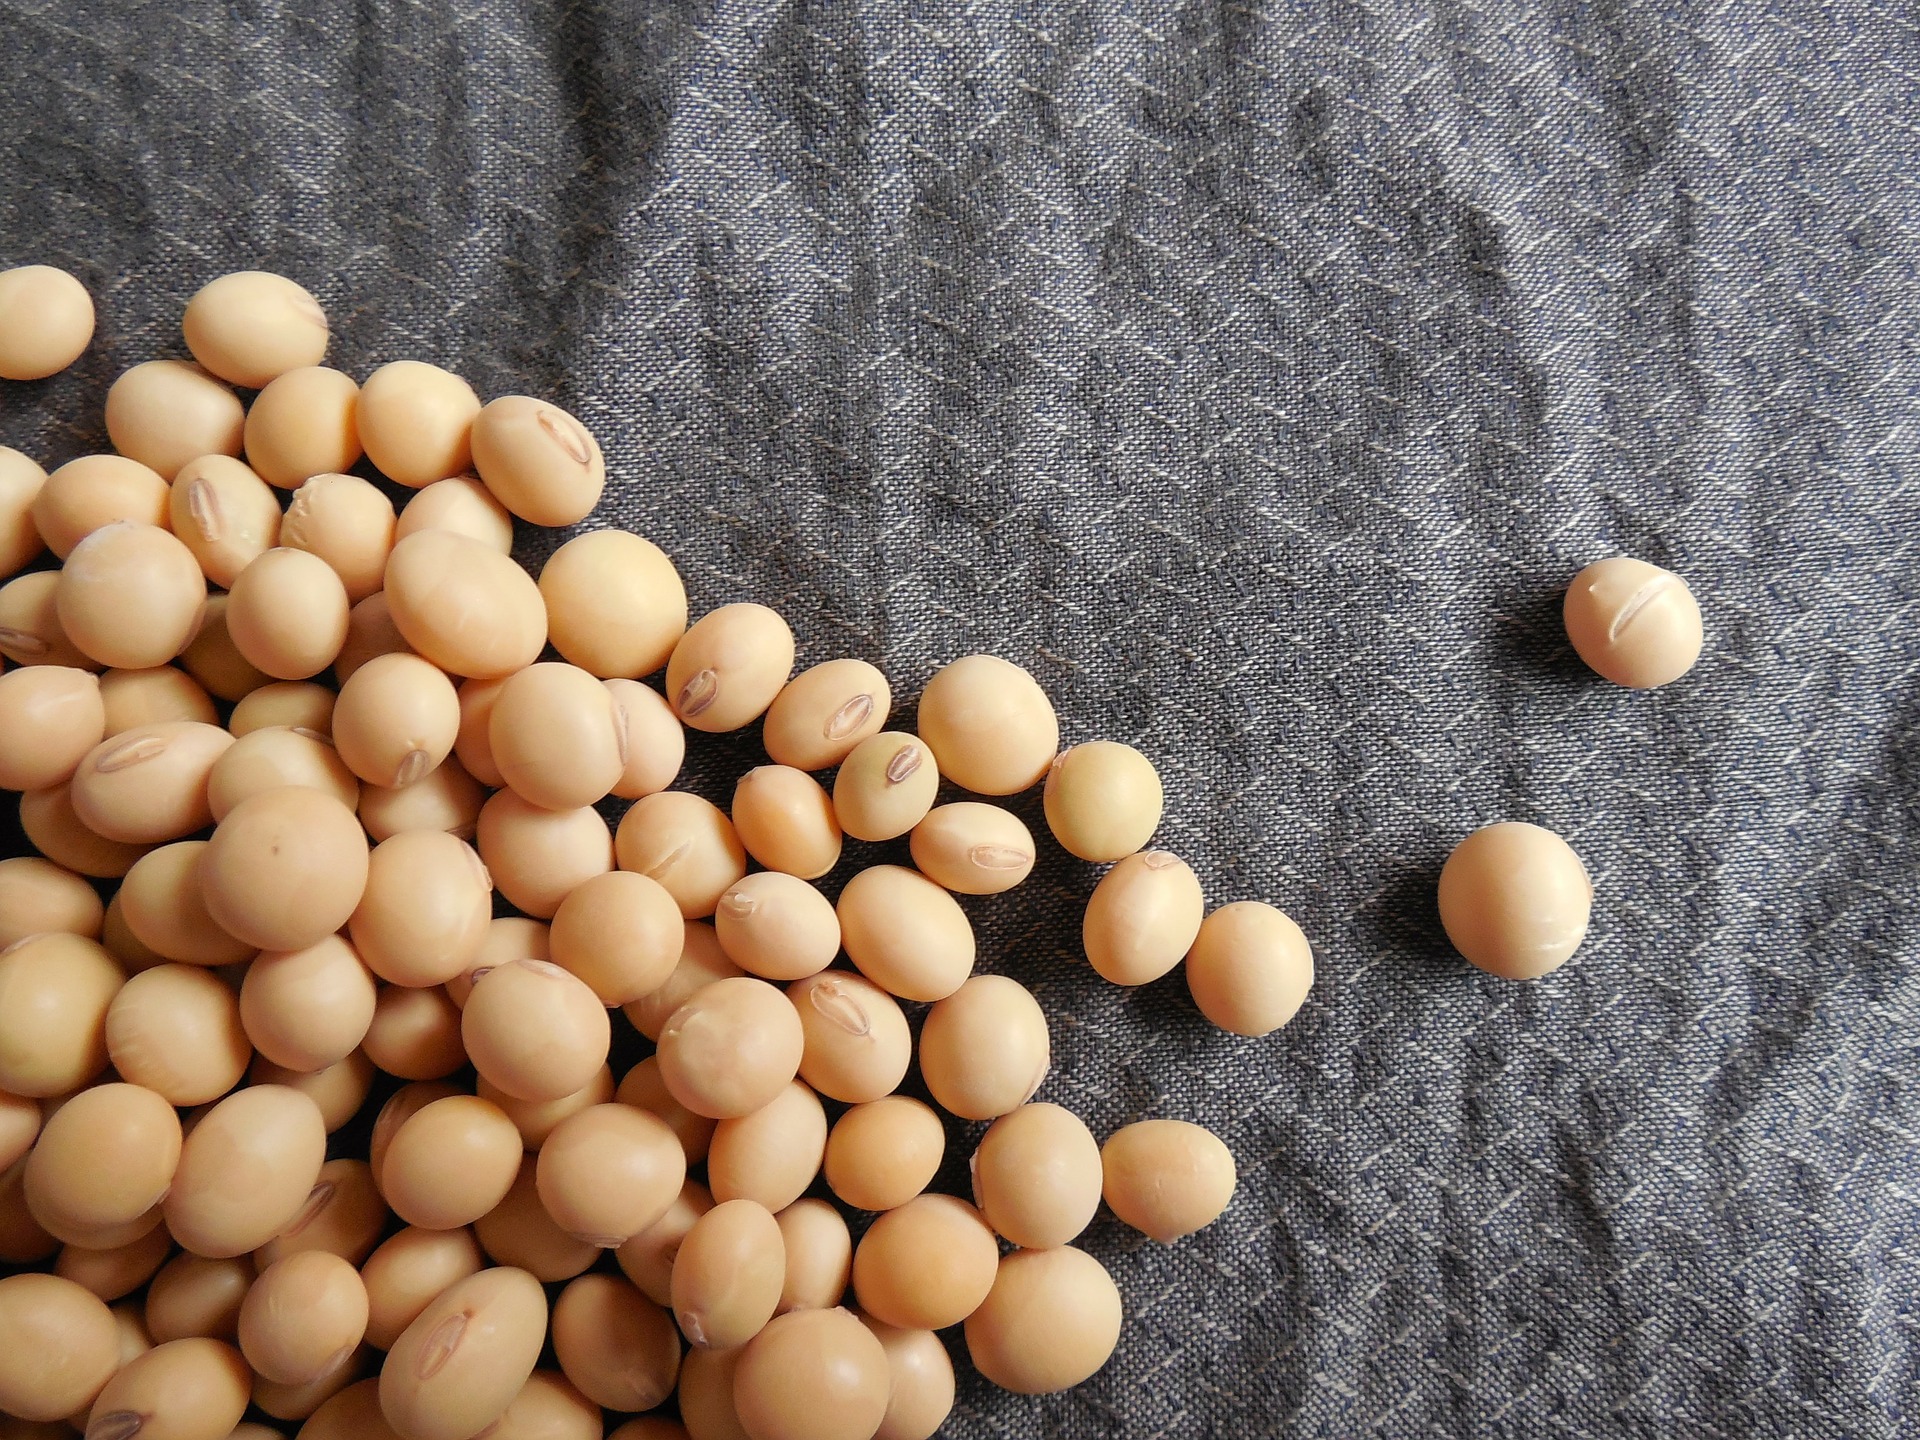 soybeans-182295_1920